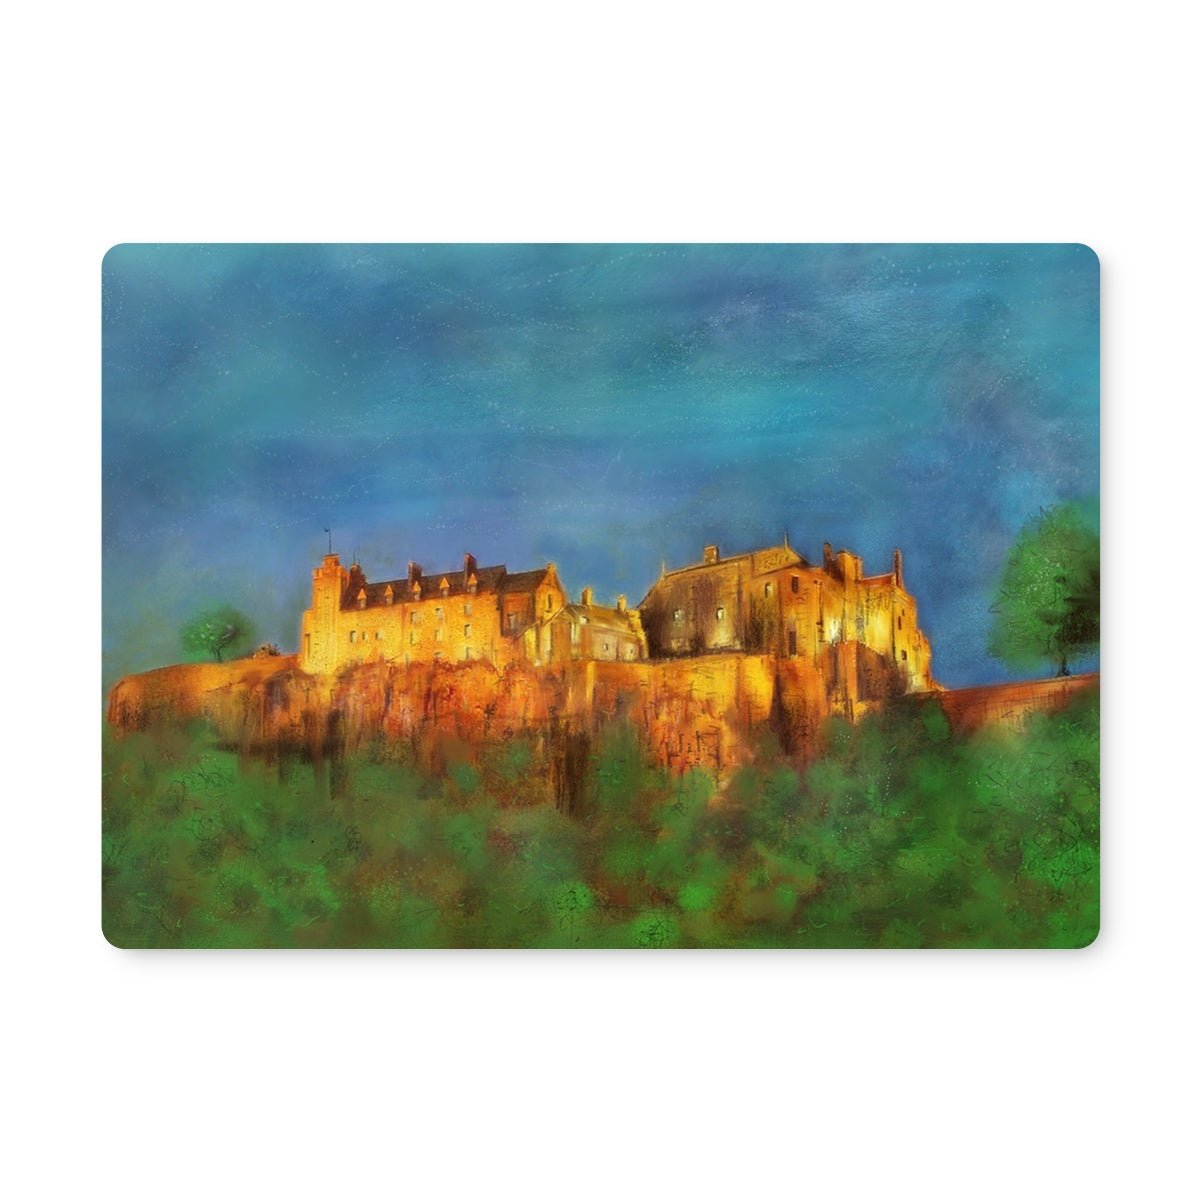 Stirling Castle Art Gifts Placemat-Placemats-Historic & Iconic Scotland Art Gallery-Single Placemat-Paintings, Prints, Homeware, Art Gifts From Scotland By Scottish Artist Kevin Hunter